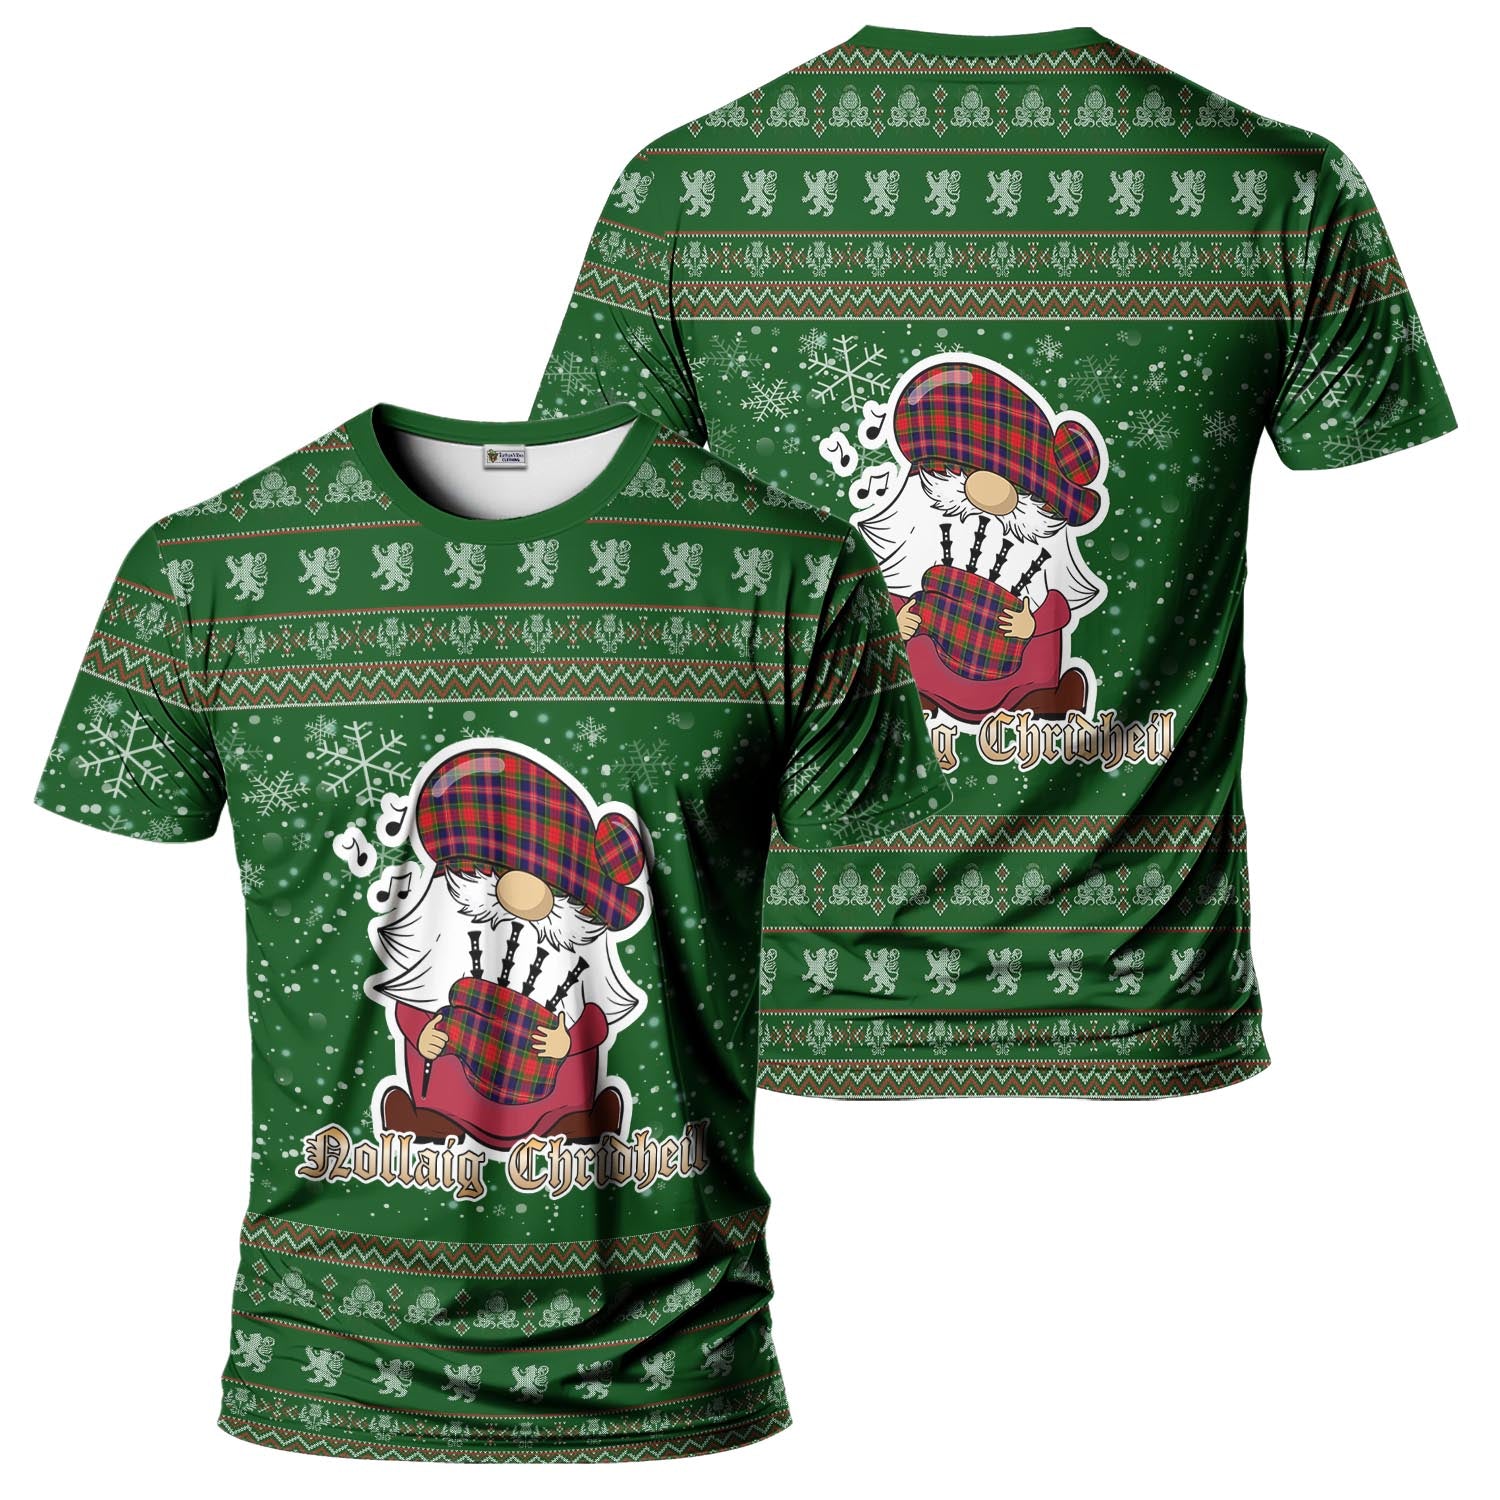 MacPherson Modern Clan Christmas Family T-Shirt with Funny Gnome Playing Bagpipes Men's Shirt Green - Tartanvibesclothing